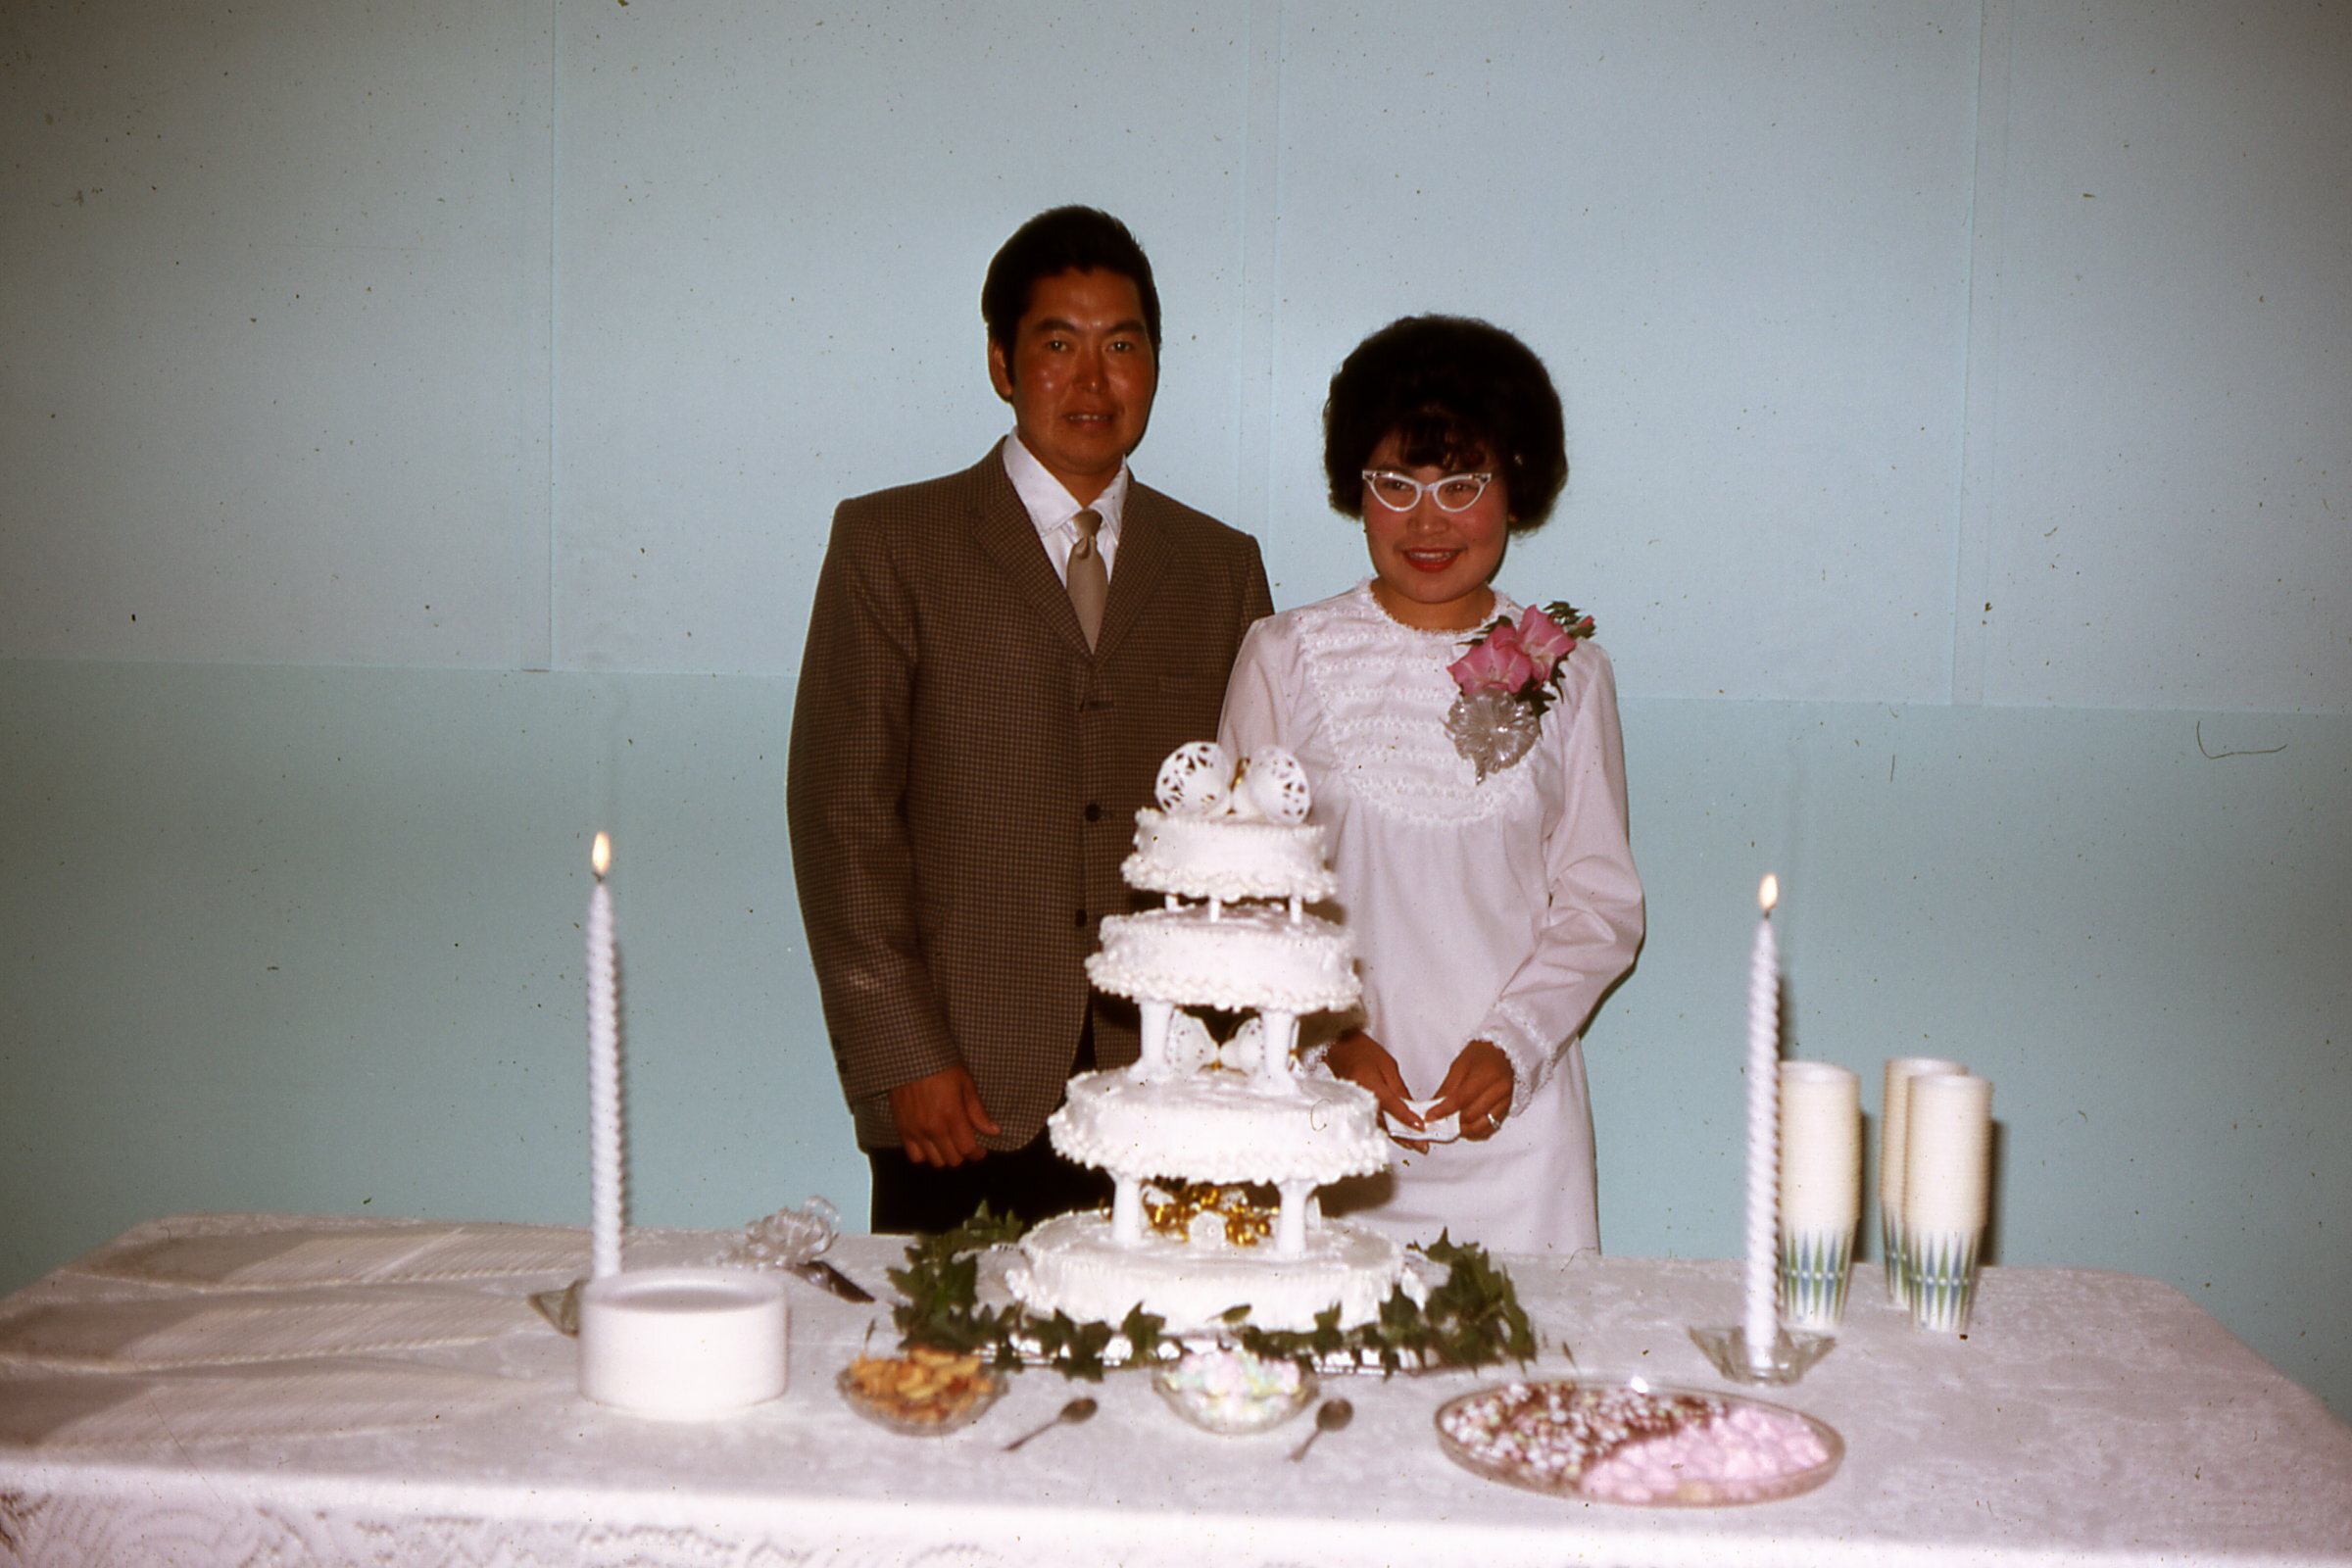 1969 Moses and Madrona Paine wedding.jpg